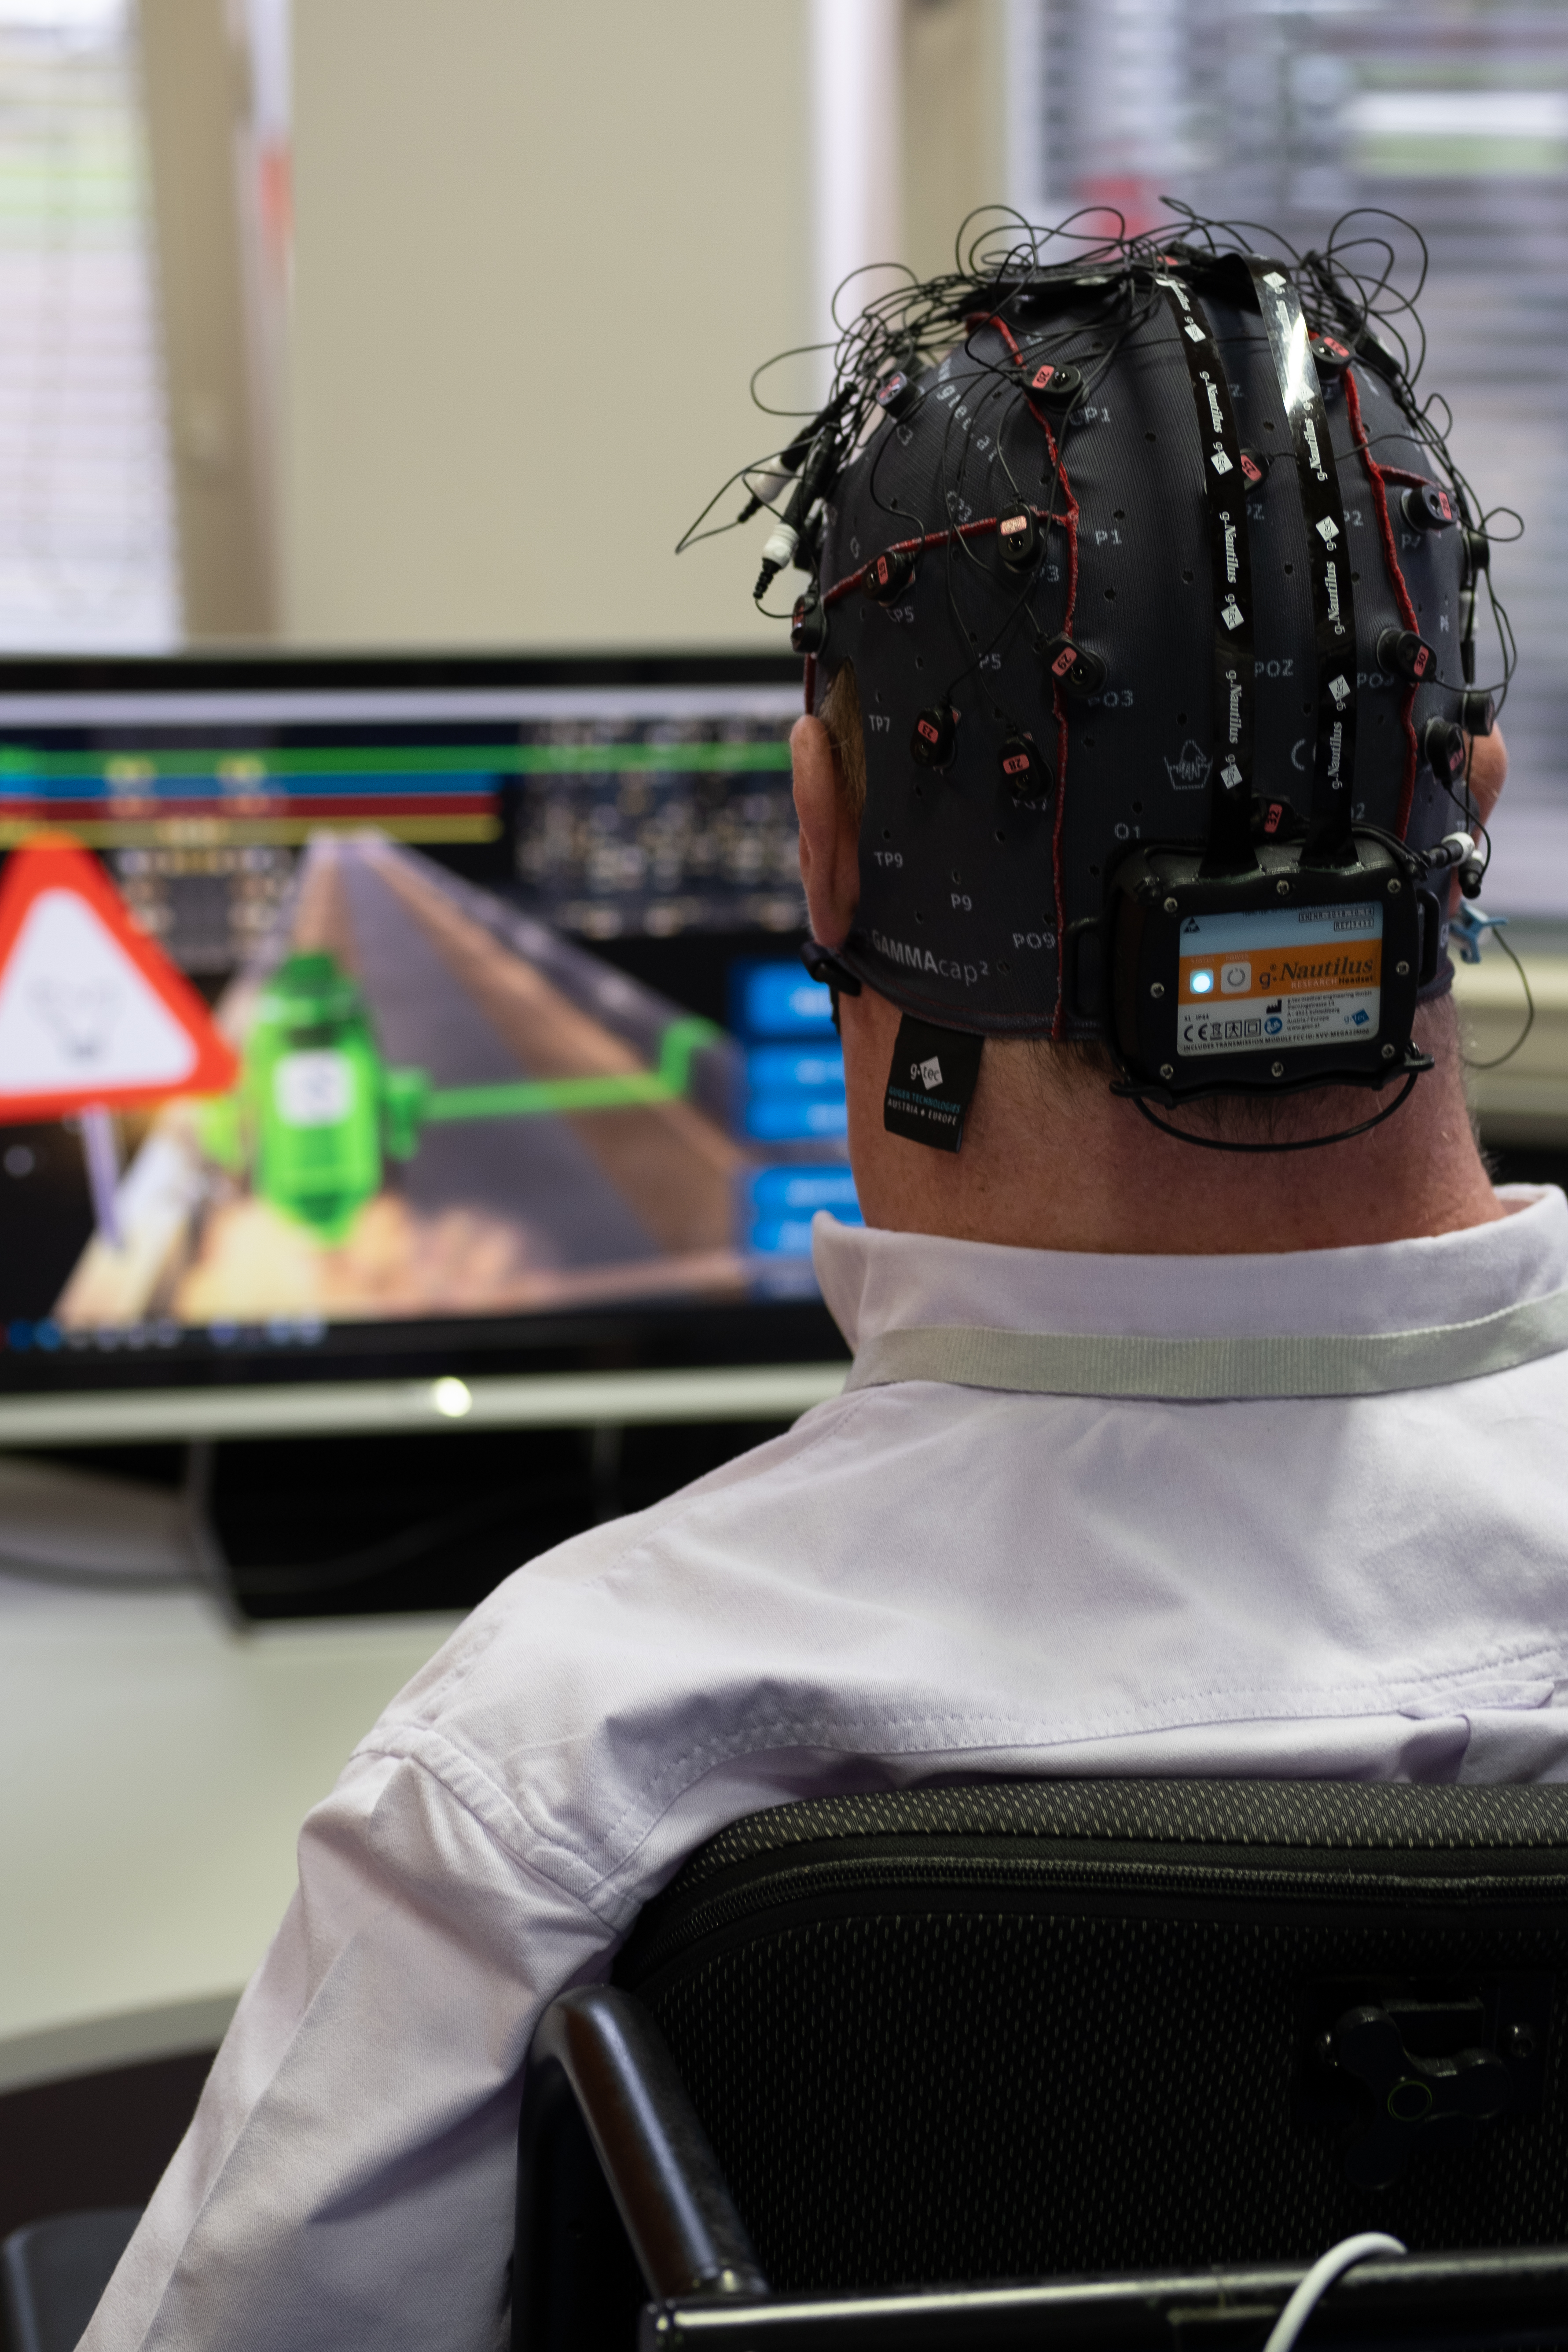 In the game ‘BrainDriver’, pilots steer a virtual car with their thoughts using a brain-computer interface. © ETH Zurich / Maximilian Wührer